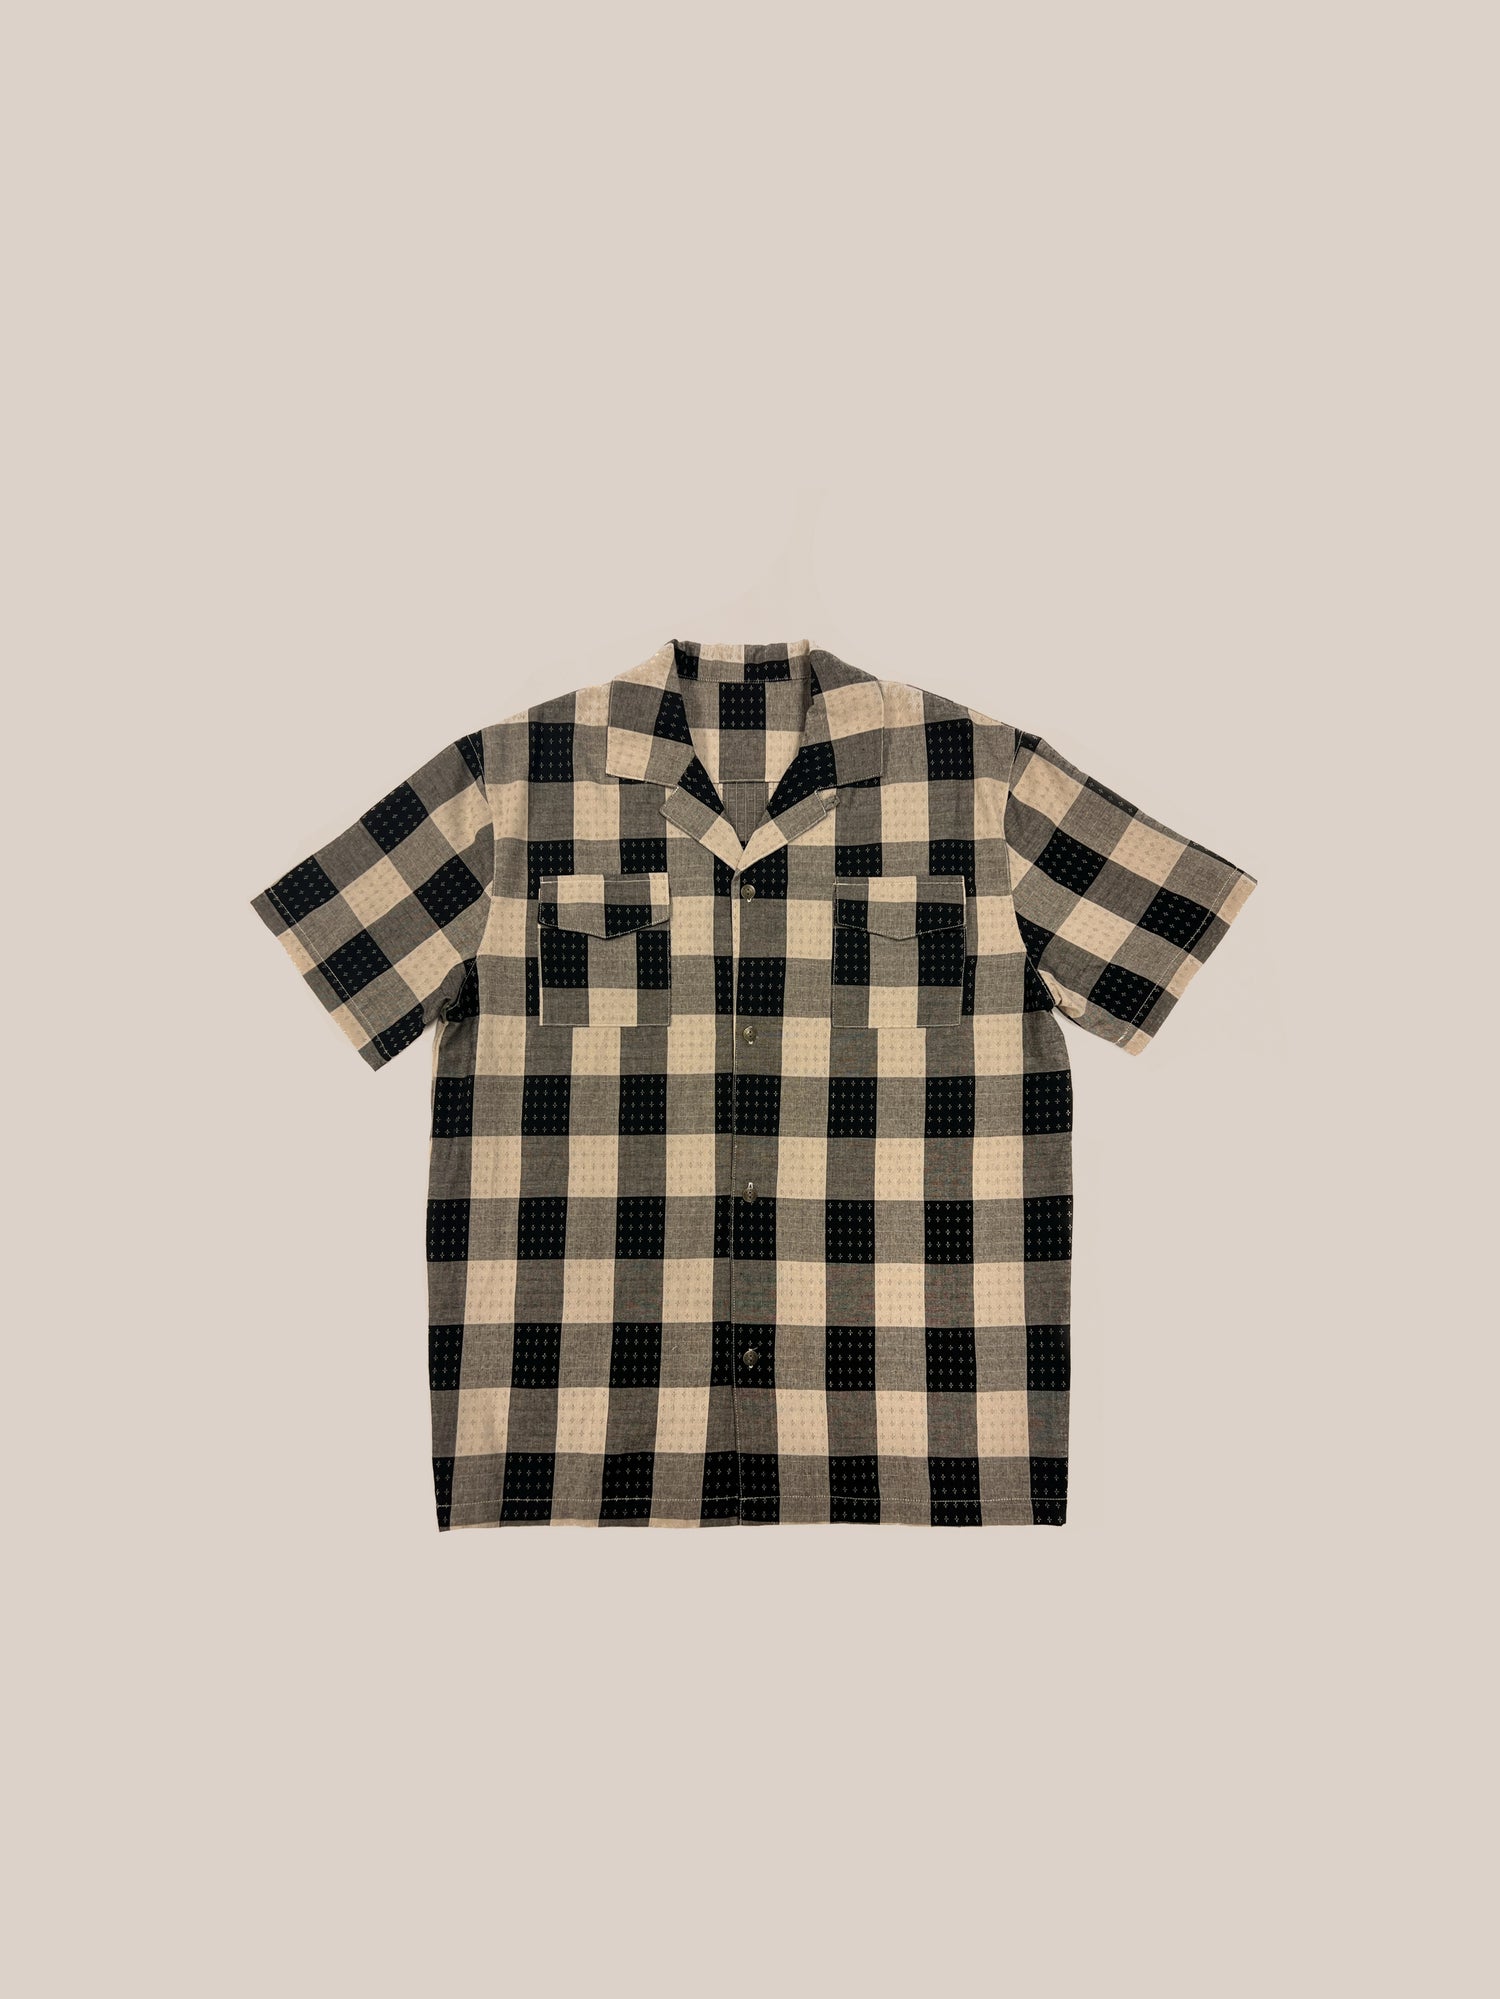 A Sample 57 (Gray Plaid Short Sleeve Camp Shirt) by Profound laid out flat on a light background.